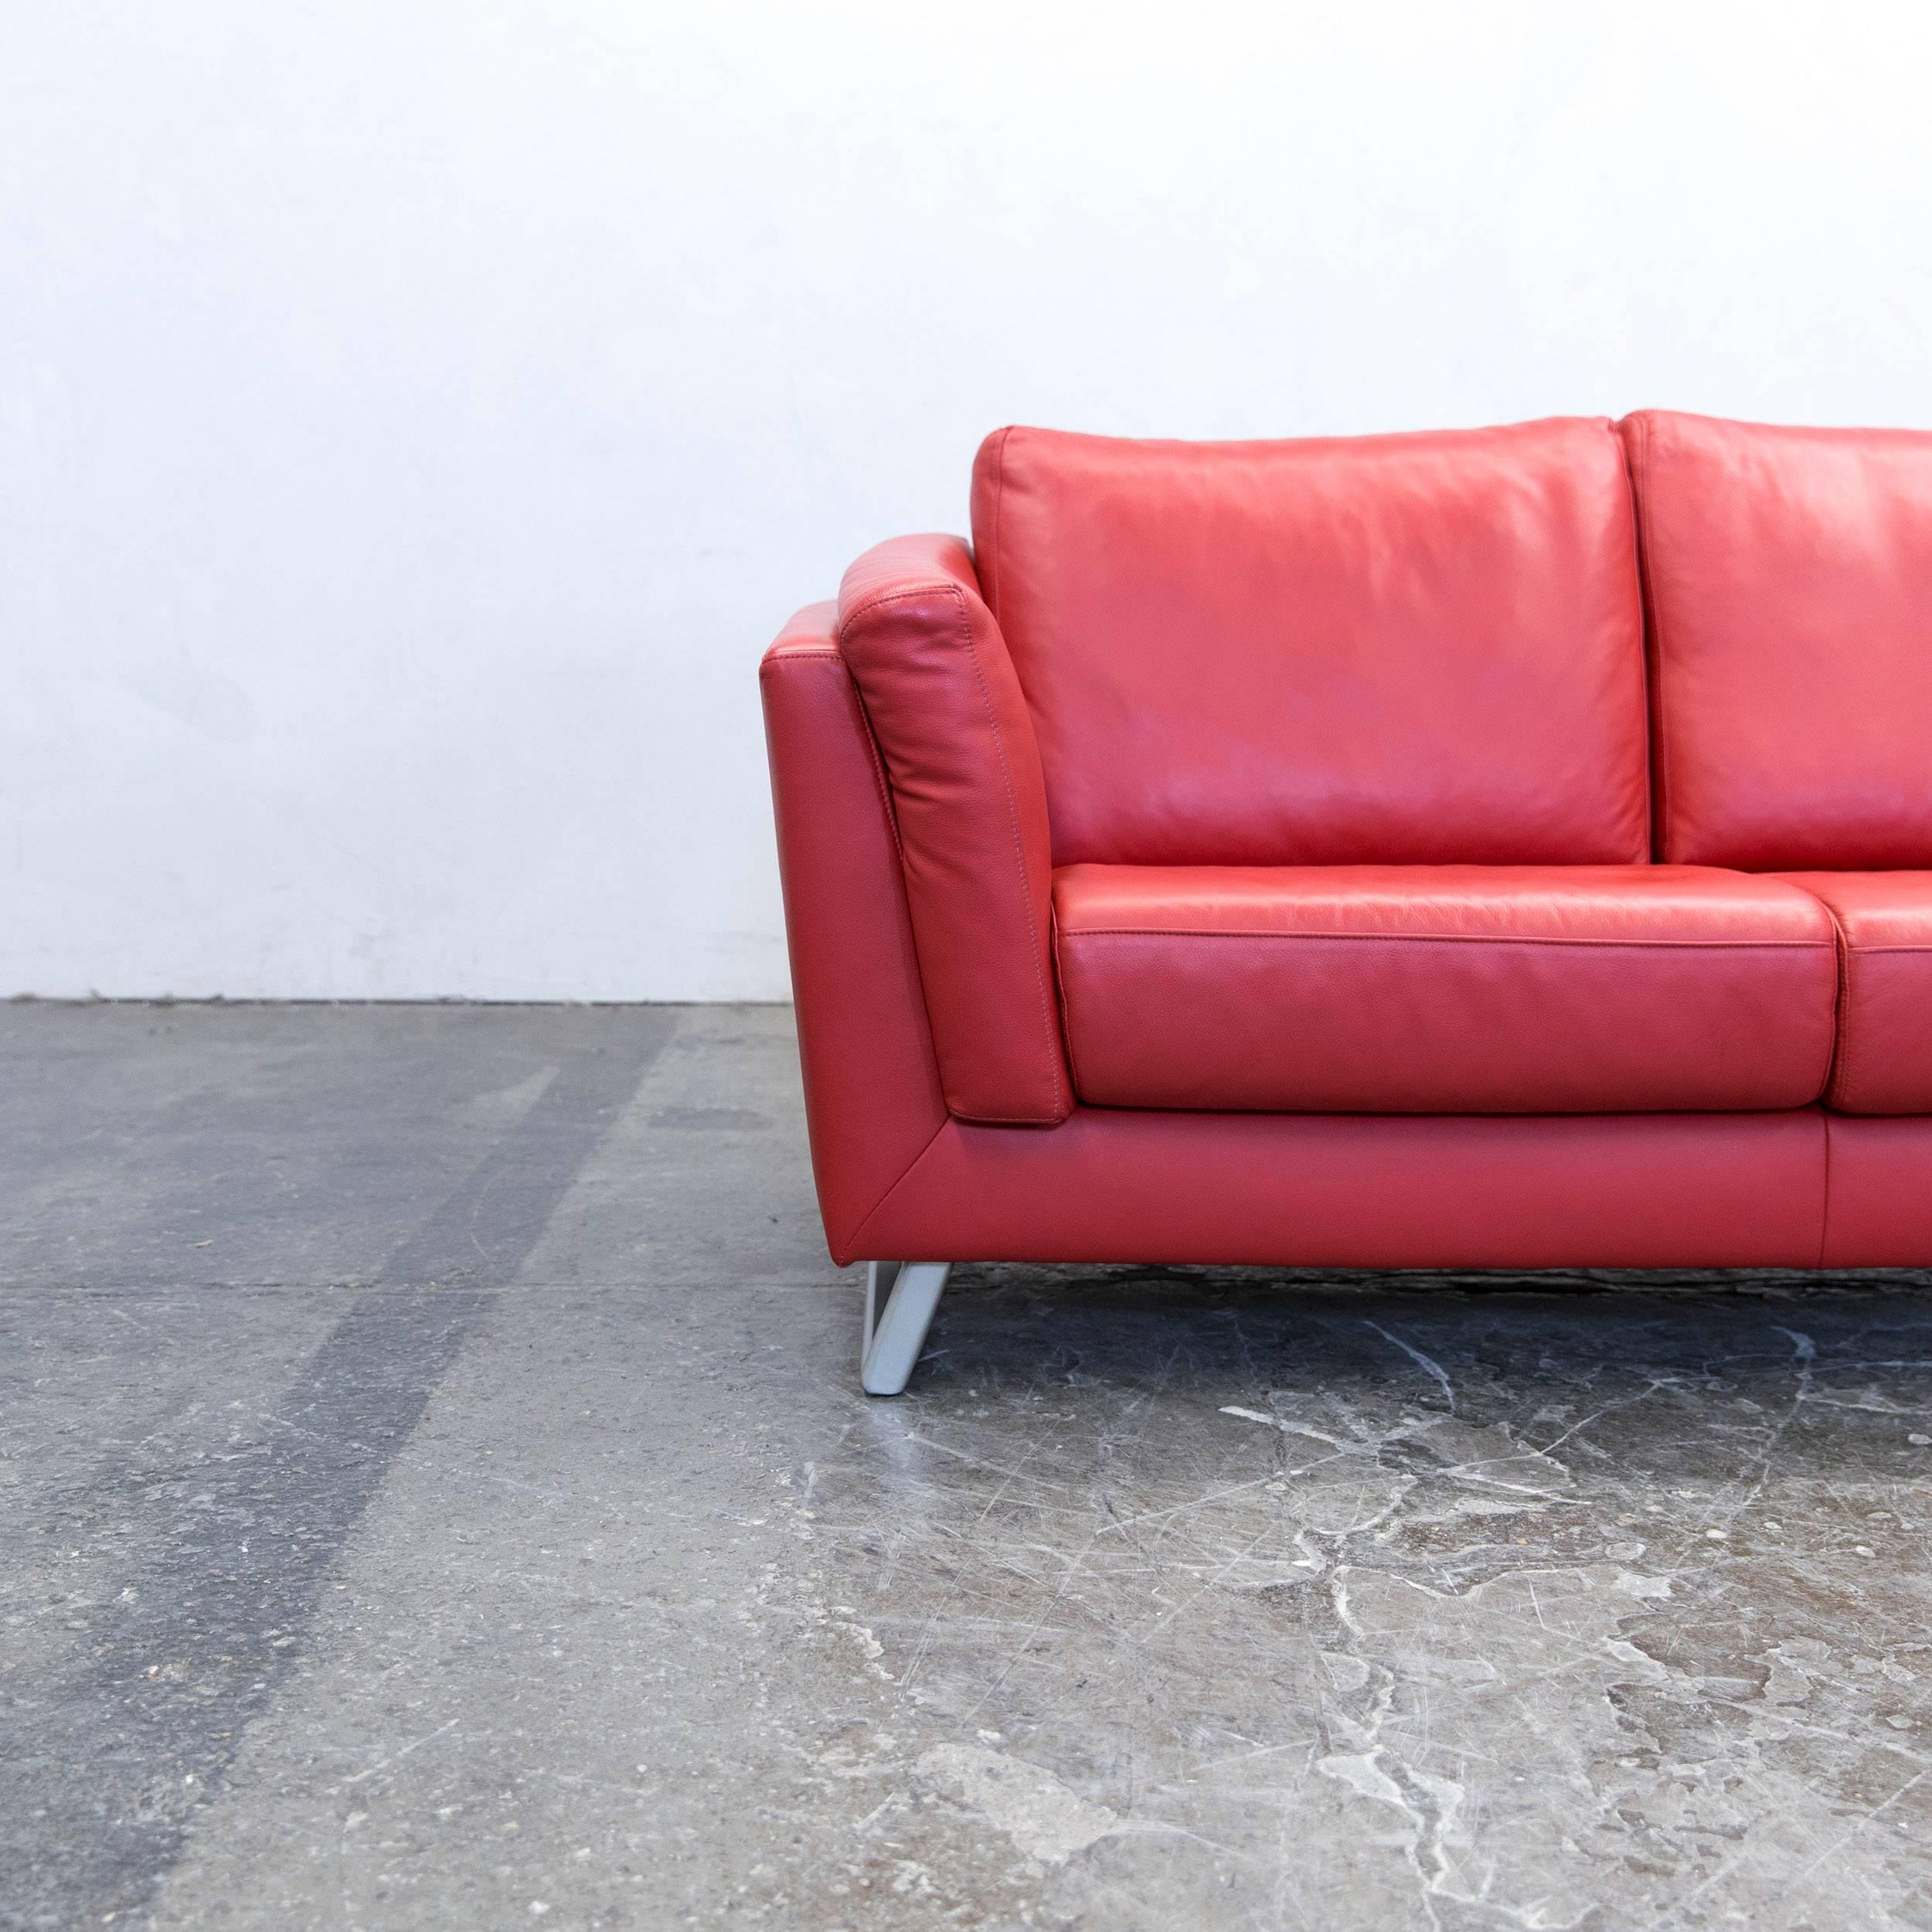 Red colored designer leather sofa, in a minimalistic and modern design, made for pure comfort.